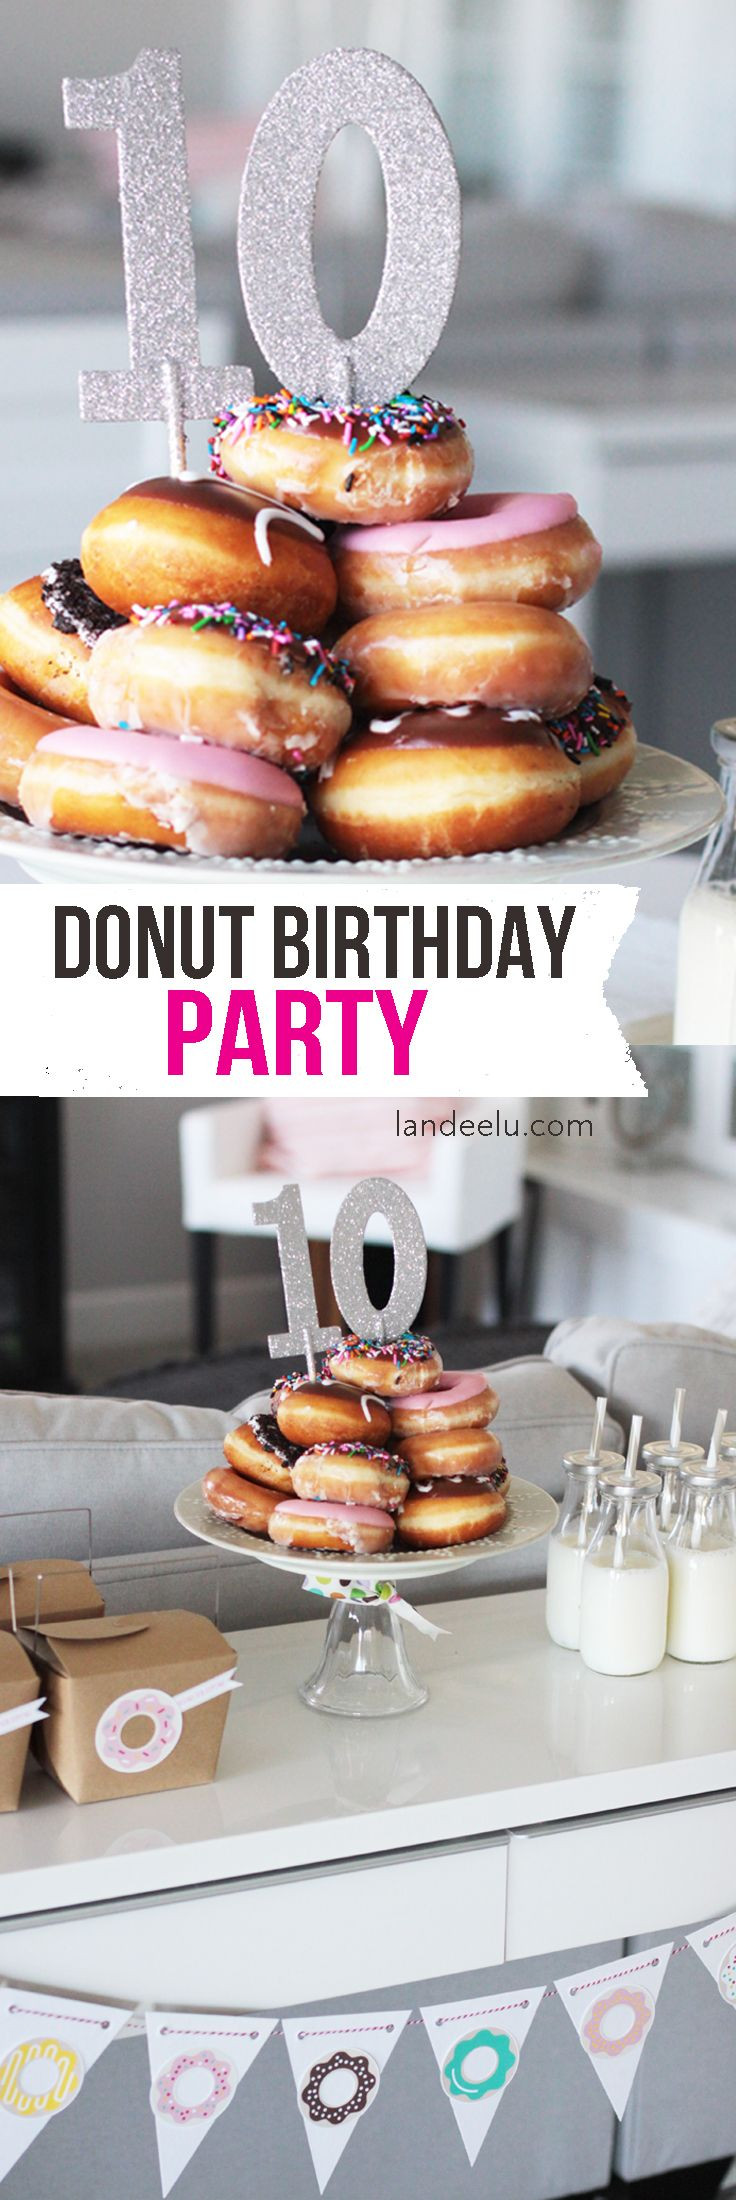 10Th Birthday Party Places
 Best 25 10th birthday parties ideas on Pinterest